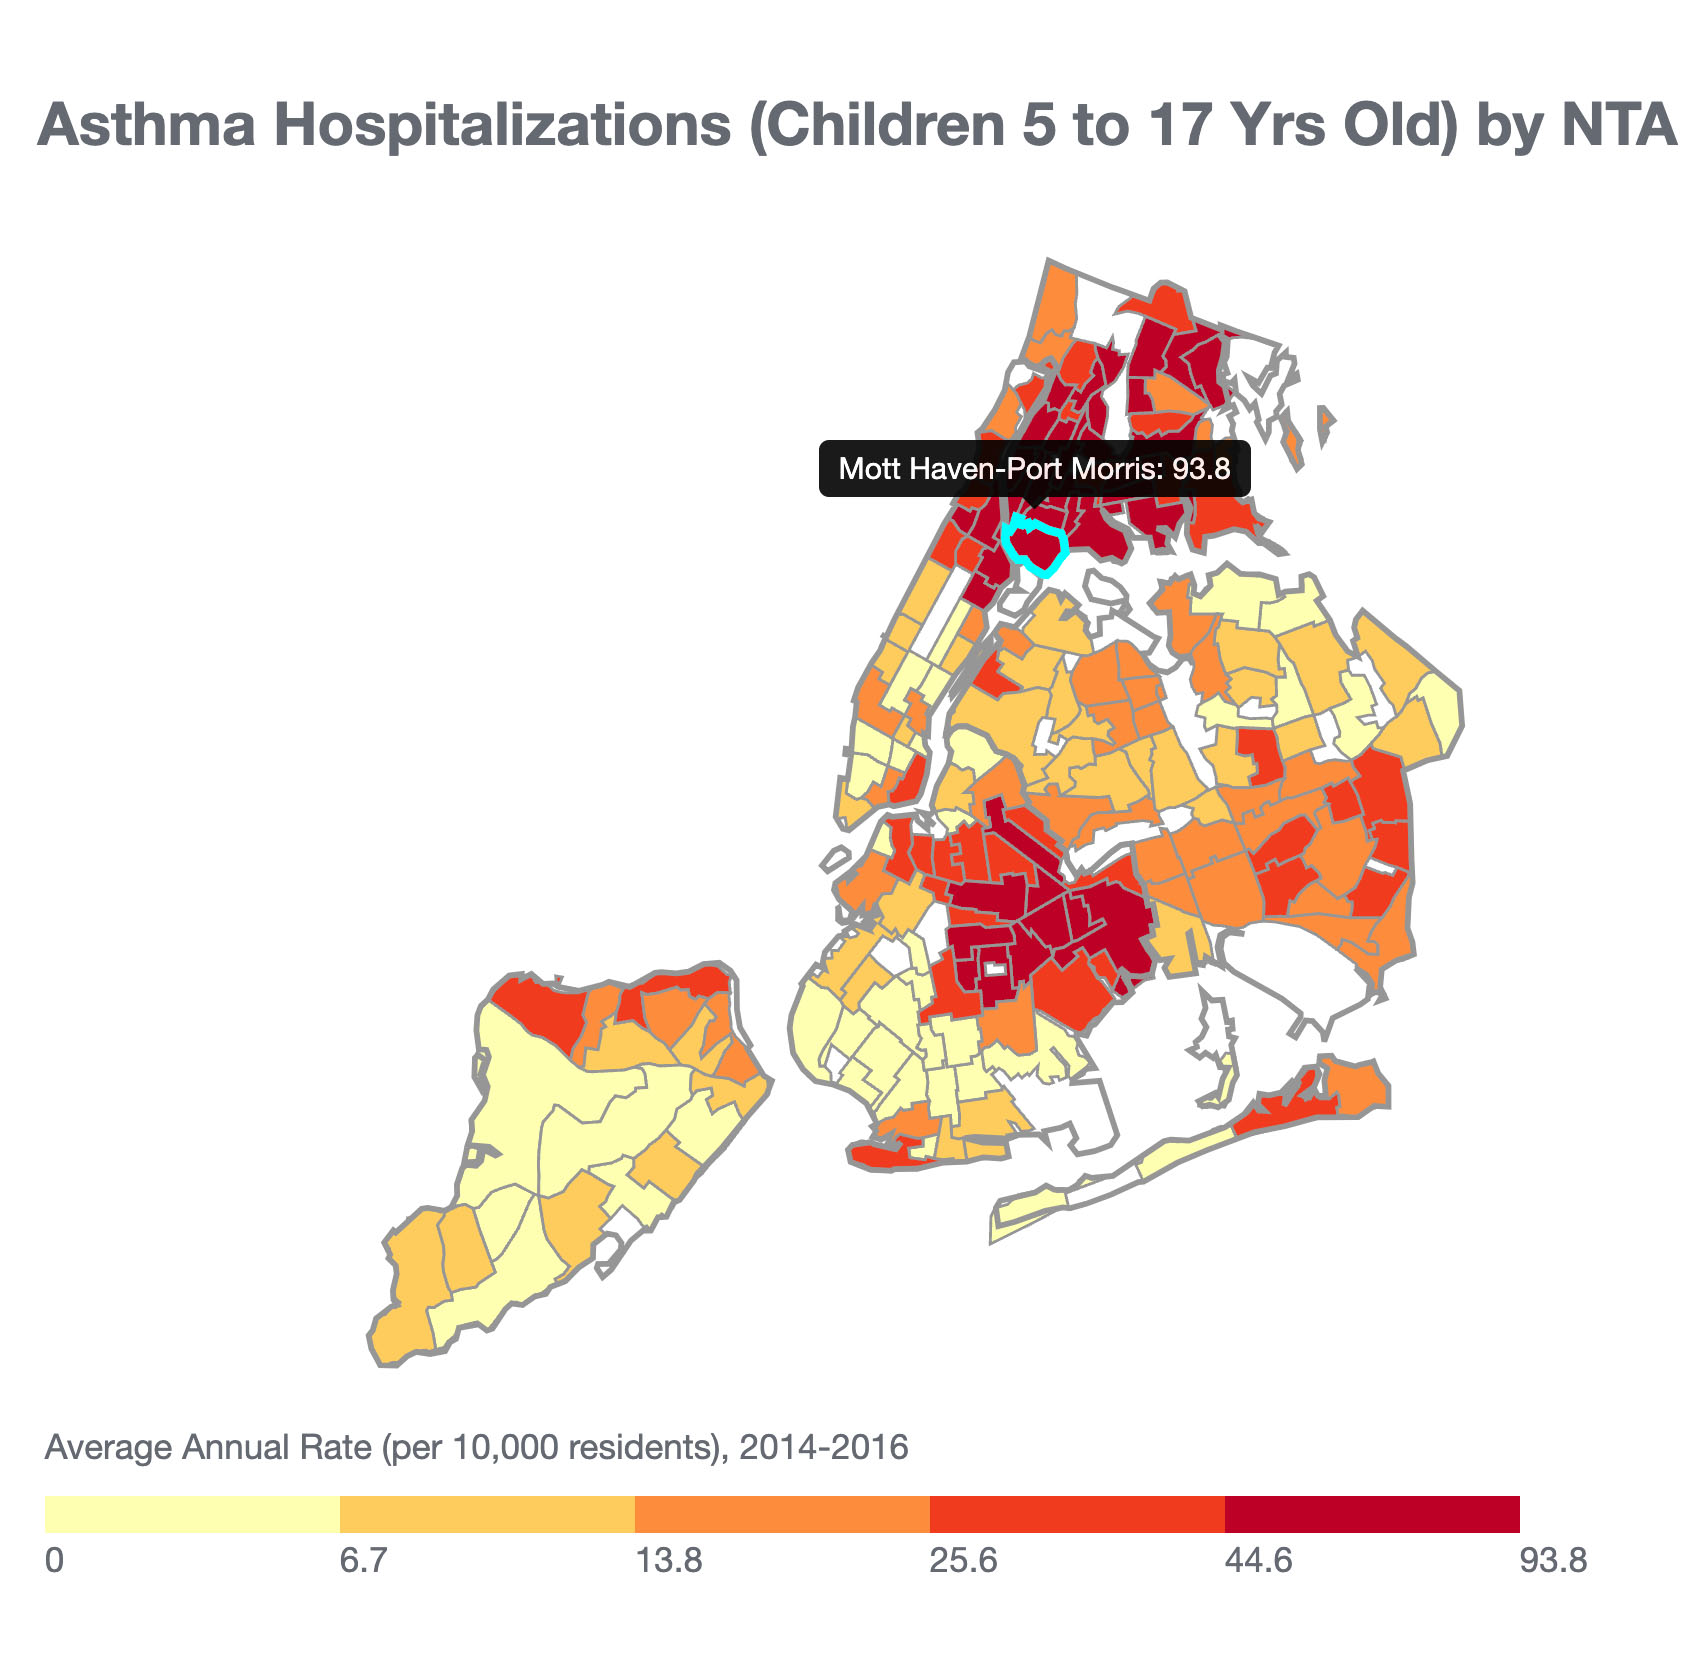 A map of asthma hospitalizations showing the highest rates in some areas of Brooklyn, North Manhattan, and the Bronx -- with the highest rates in Mott Haven-Port Morris